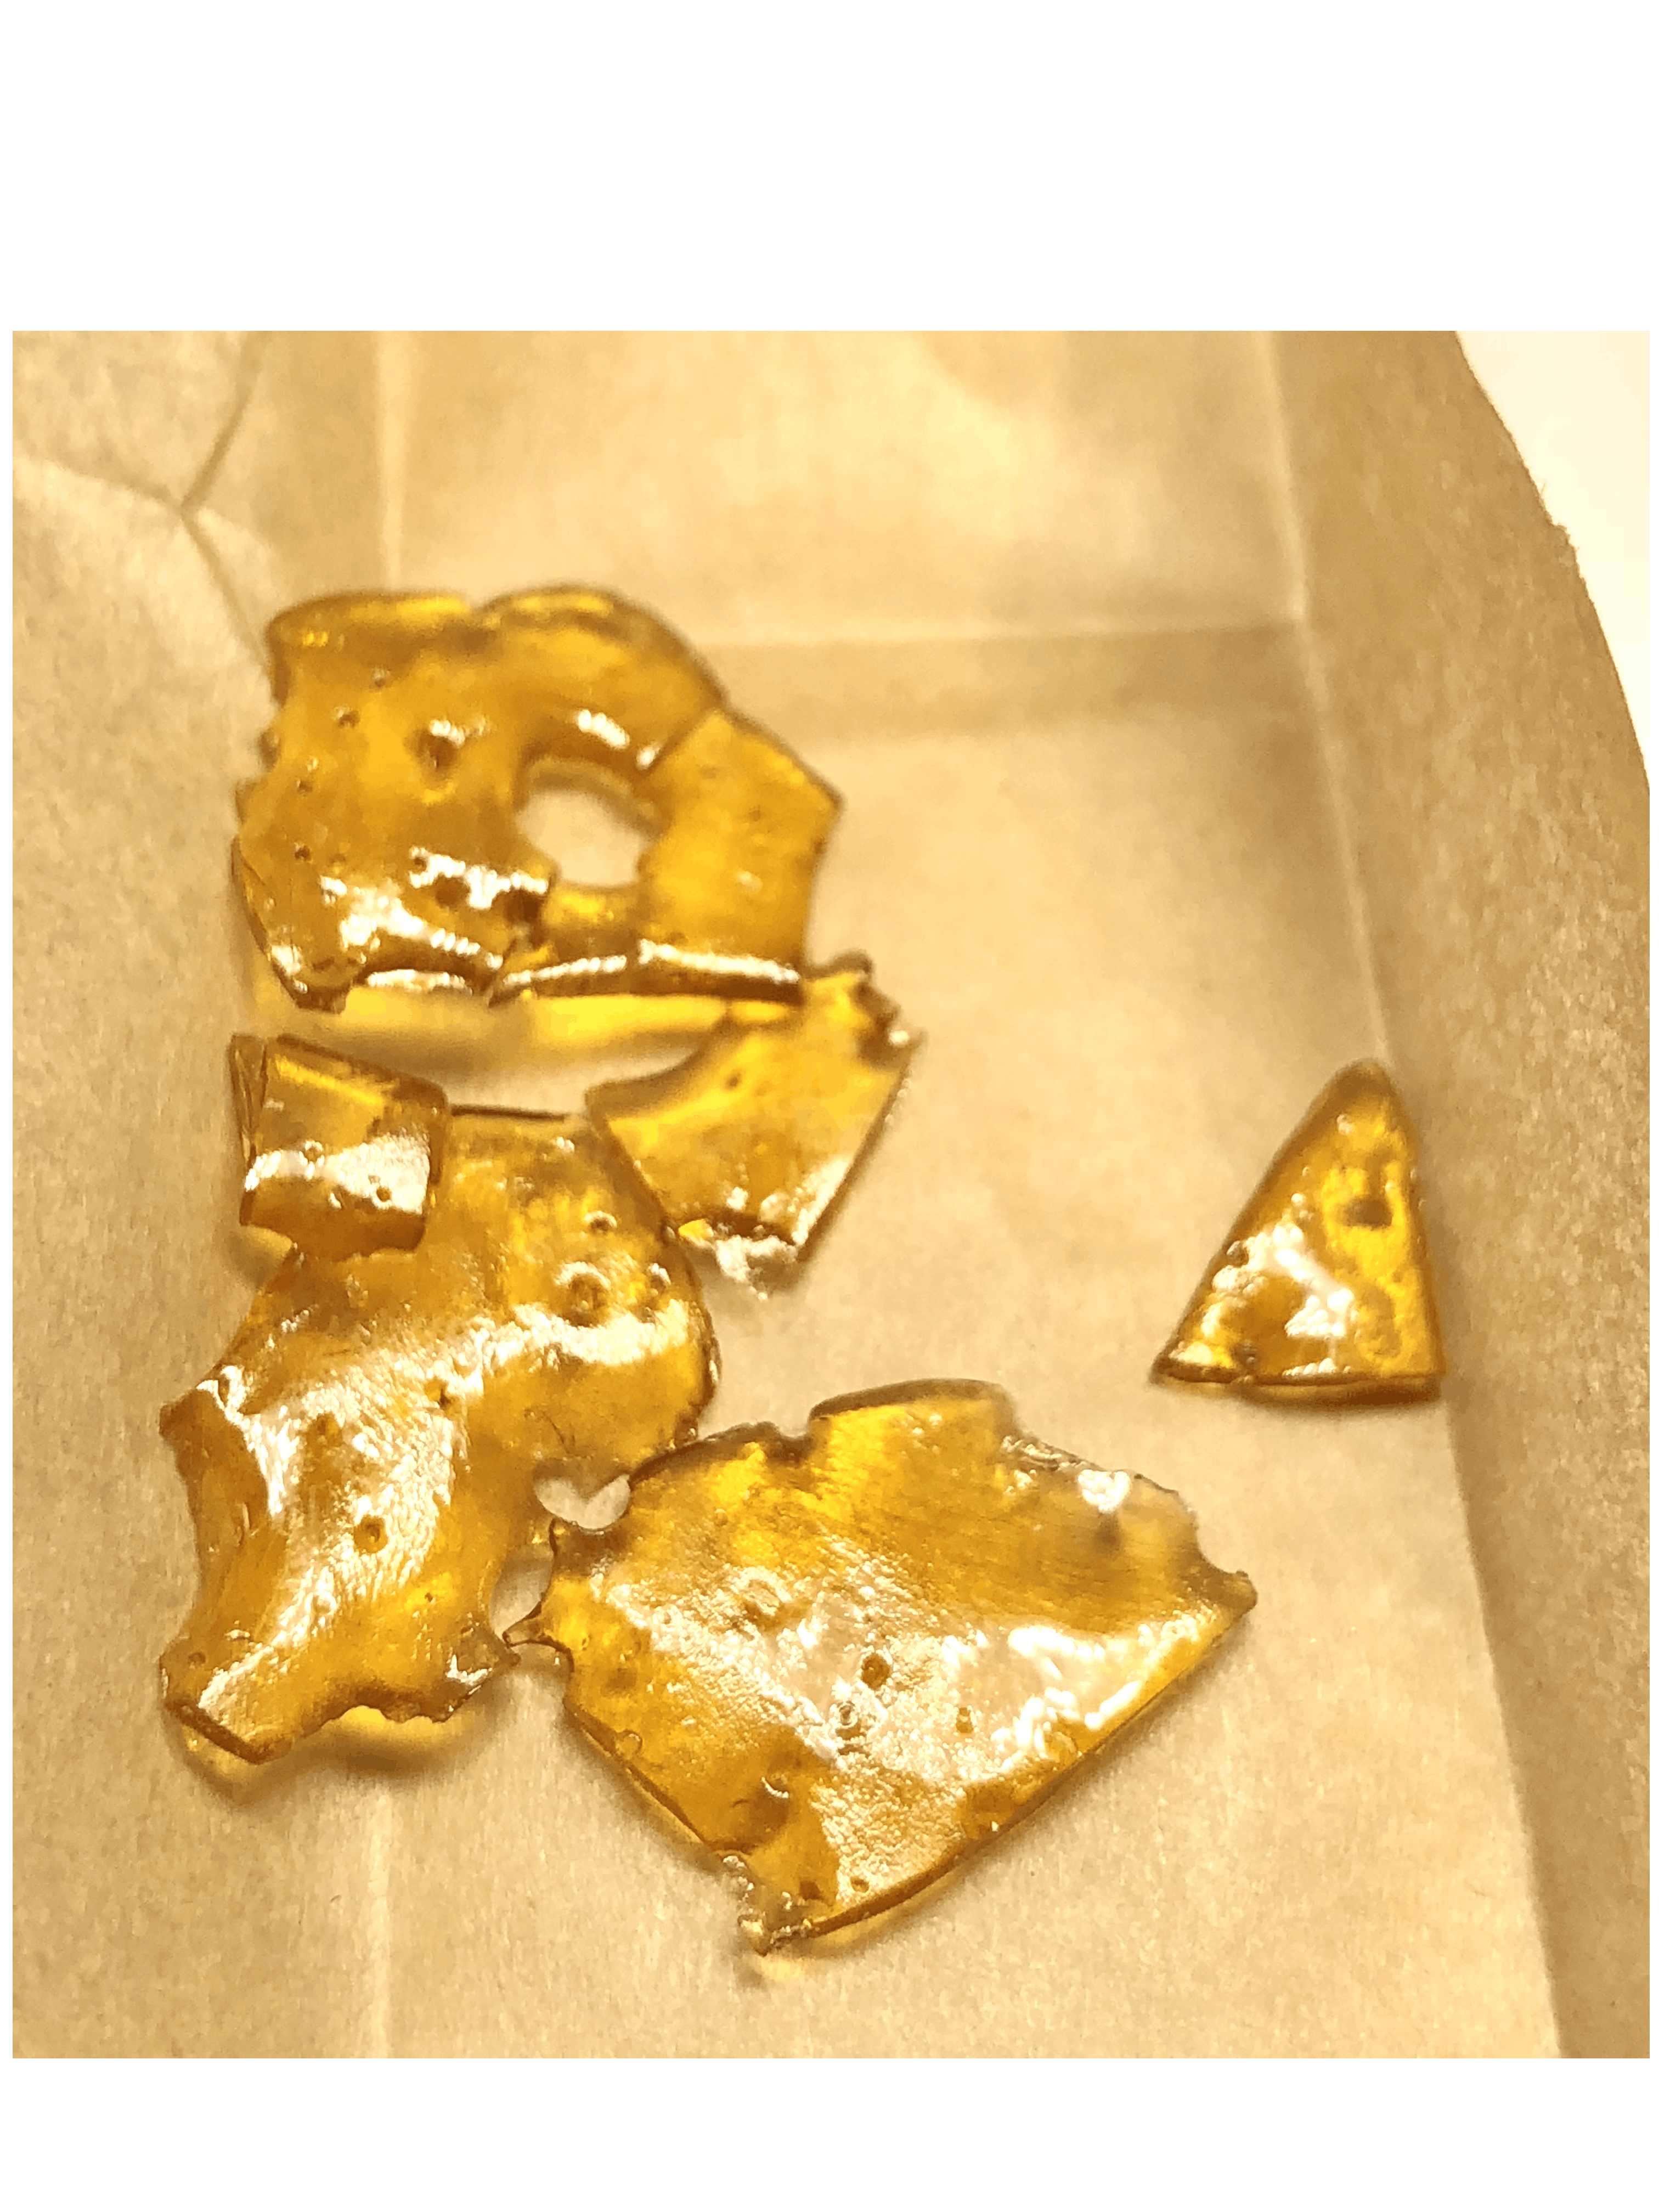 concentrate-strawberry-banana-shatter